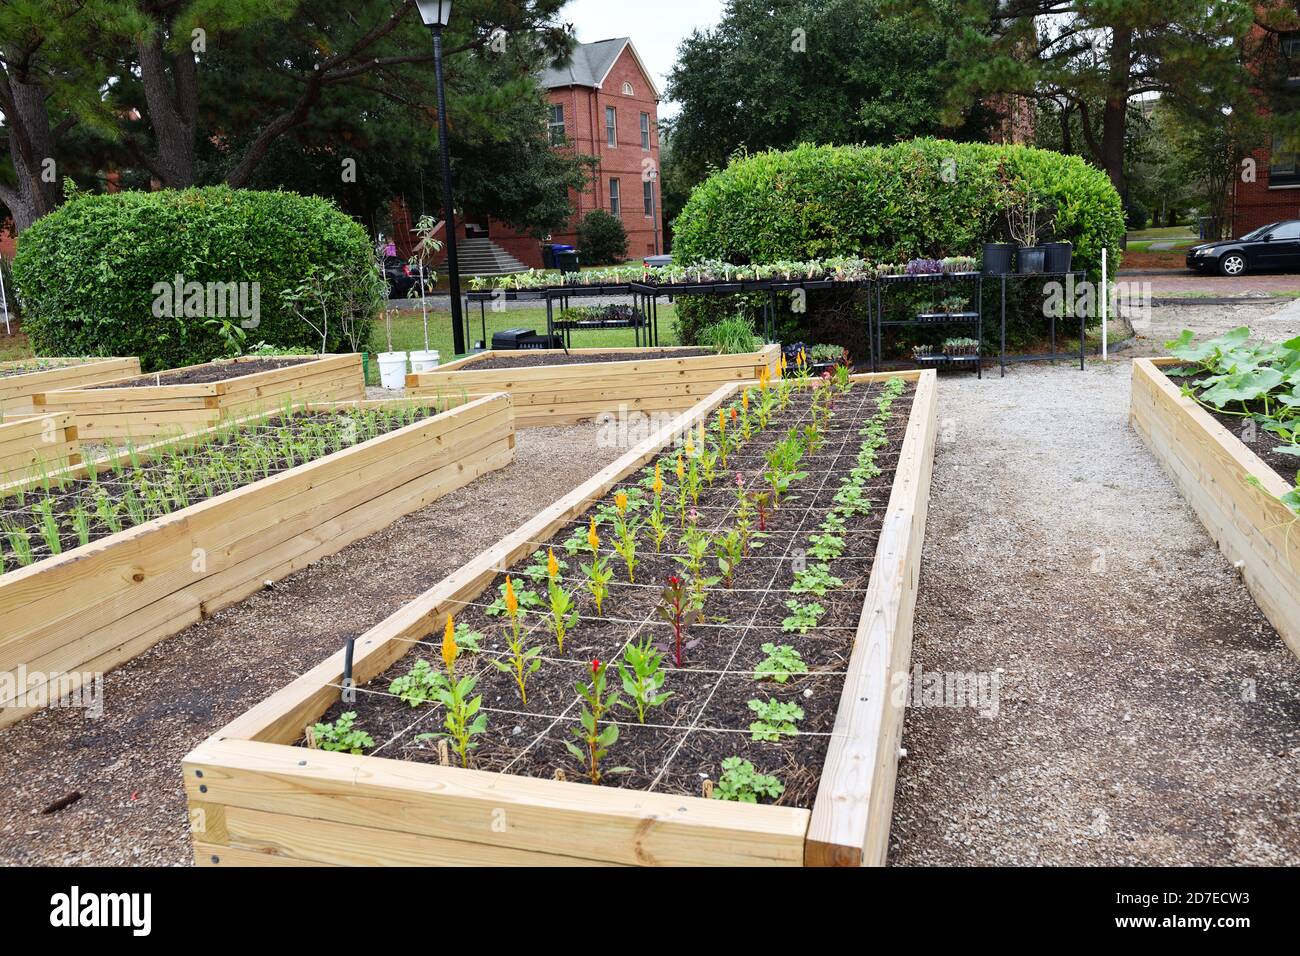 New Urban Garden on 19th Century English Village with Red Brick 2 Story Homes for Elderly Impoverished Residents Who Volunteer to Plant Vegetables. Stock Photo